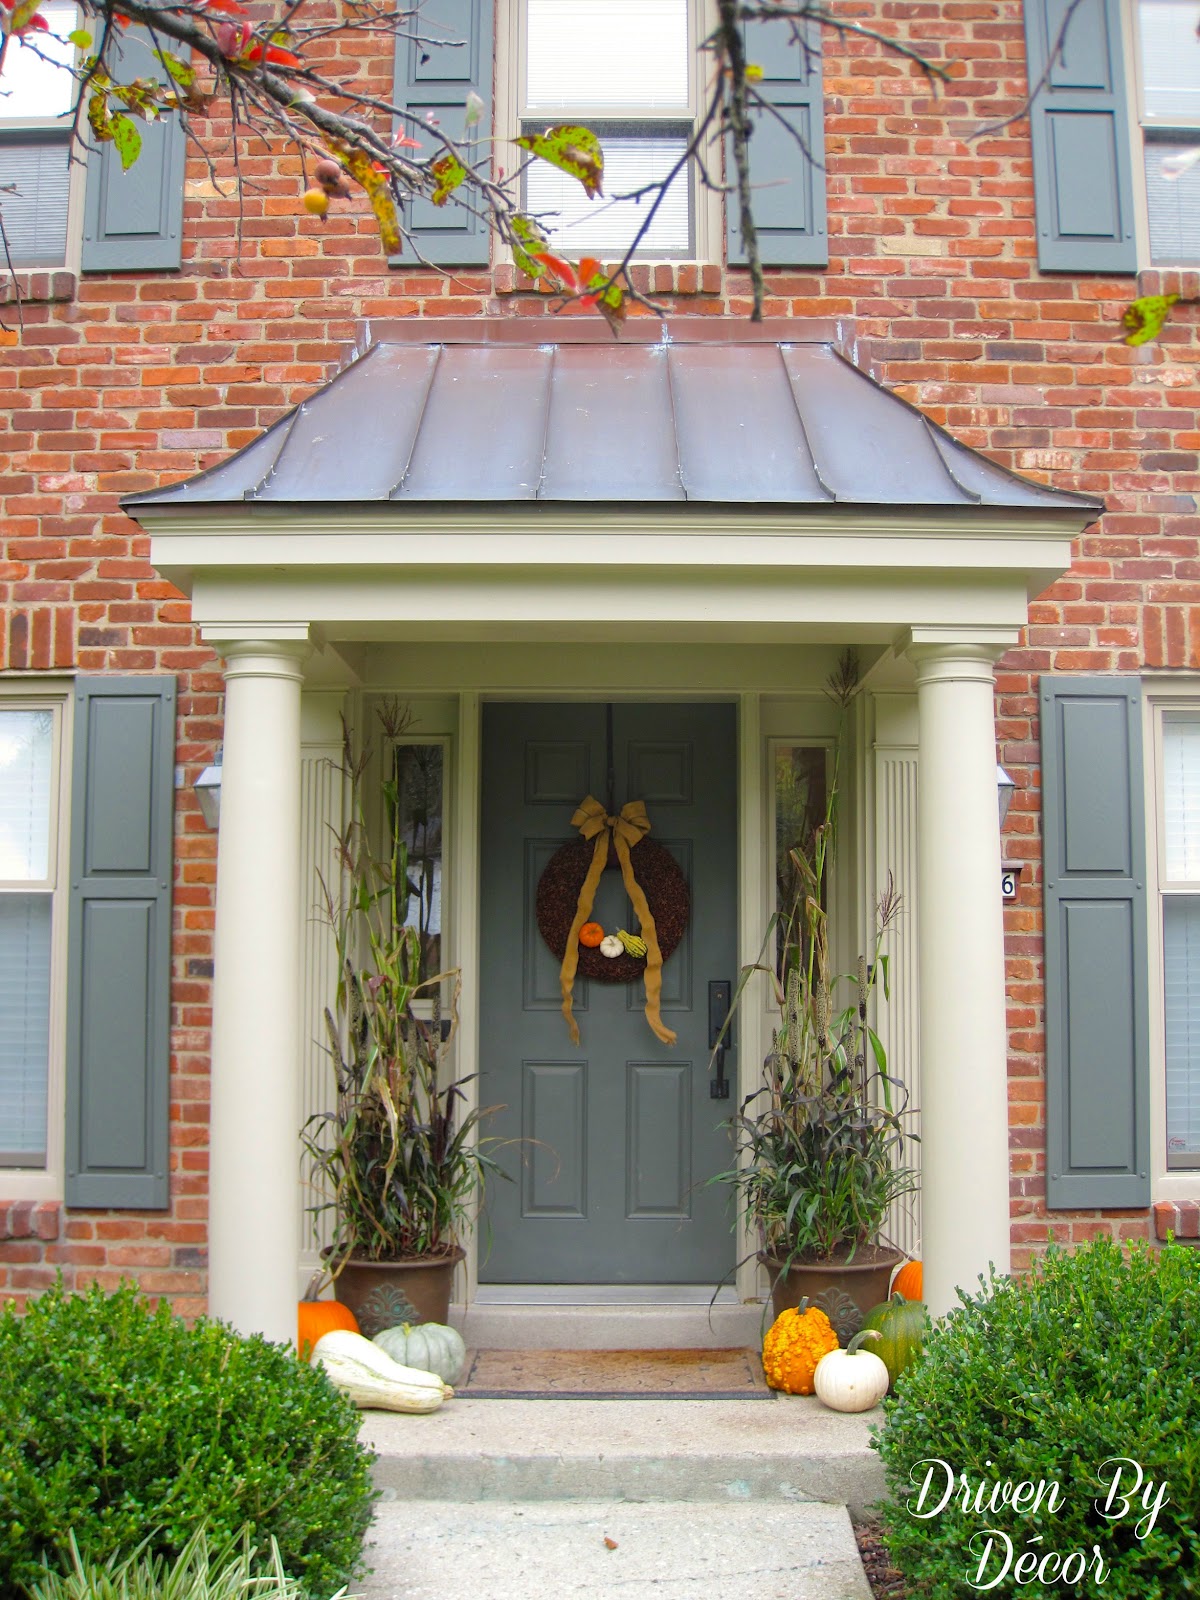 Driven By Décor: Decorating My Front Porch for Fall